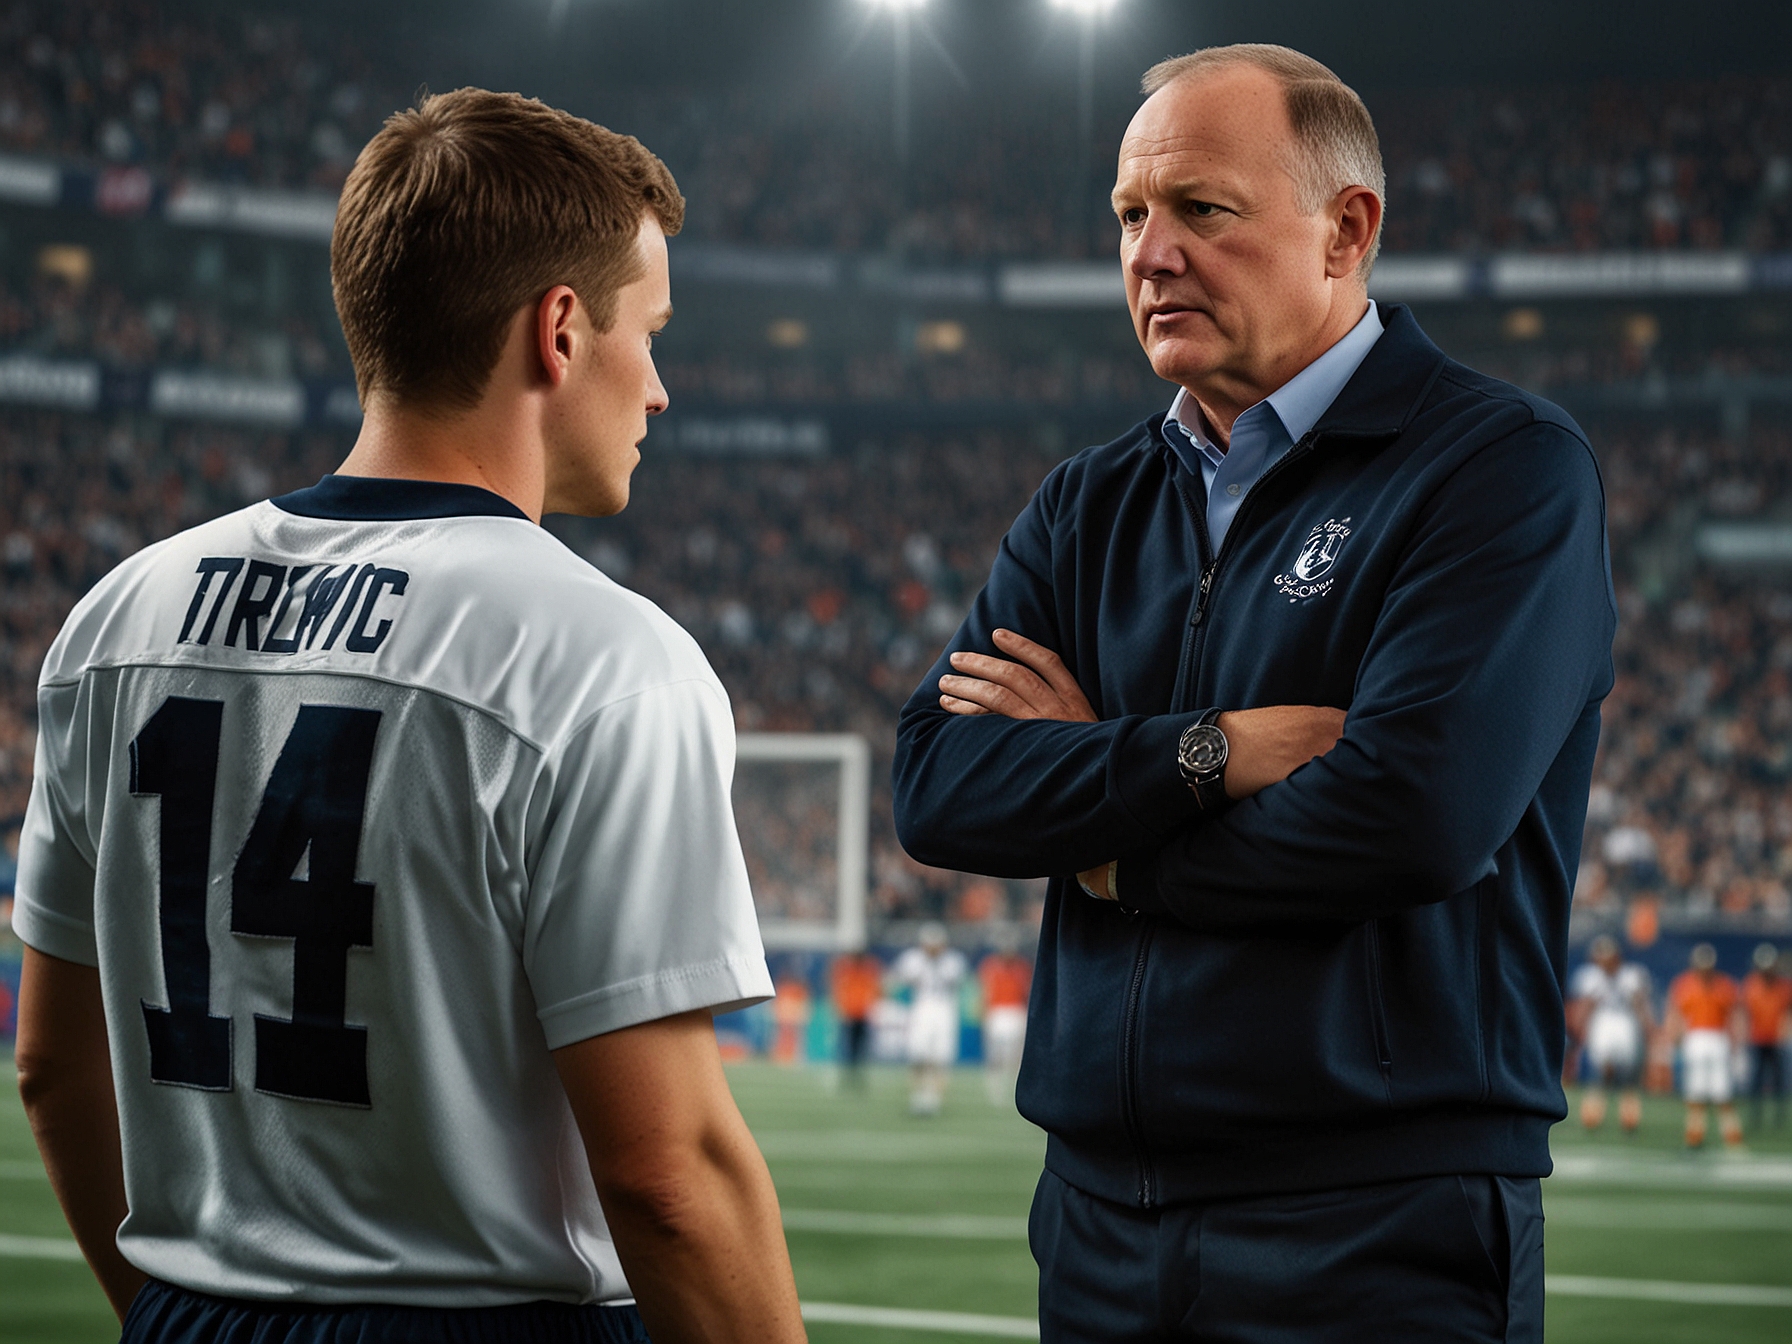 Michael Maguire strategizing with Jake Trbojevic on the sidelines, highlighting the captain's leadership abilities and crucial role in mentoring younger players on the team.